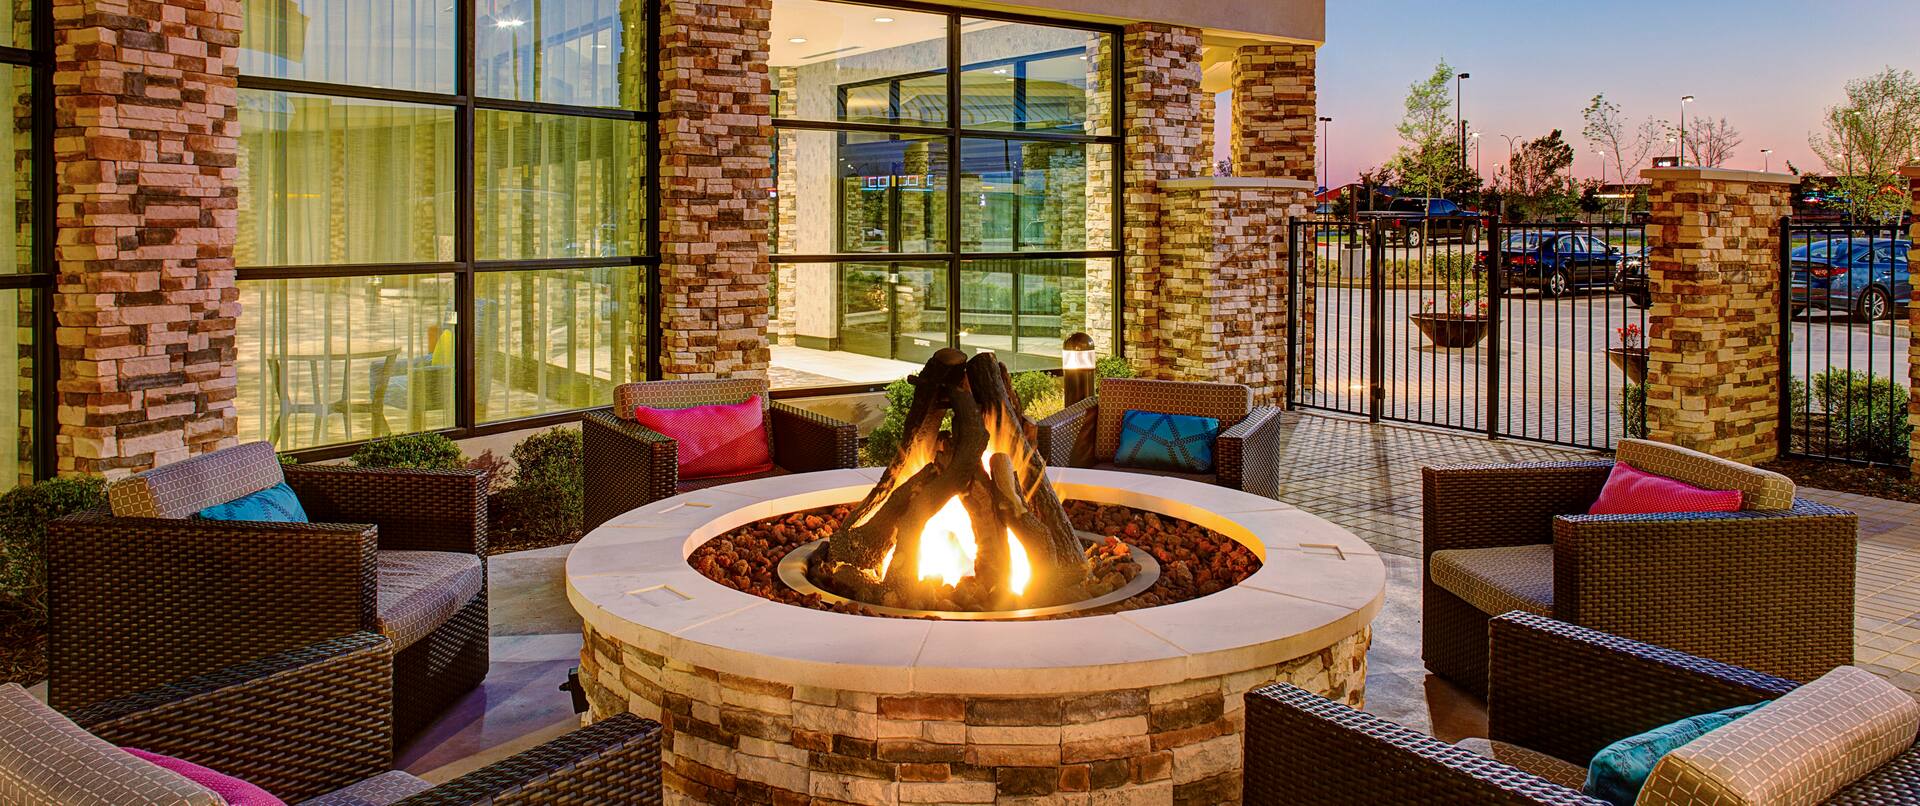 Outdoor Fire Pit and Lounge Seating